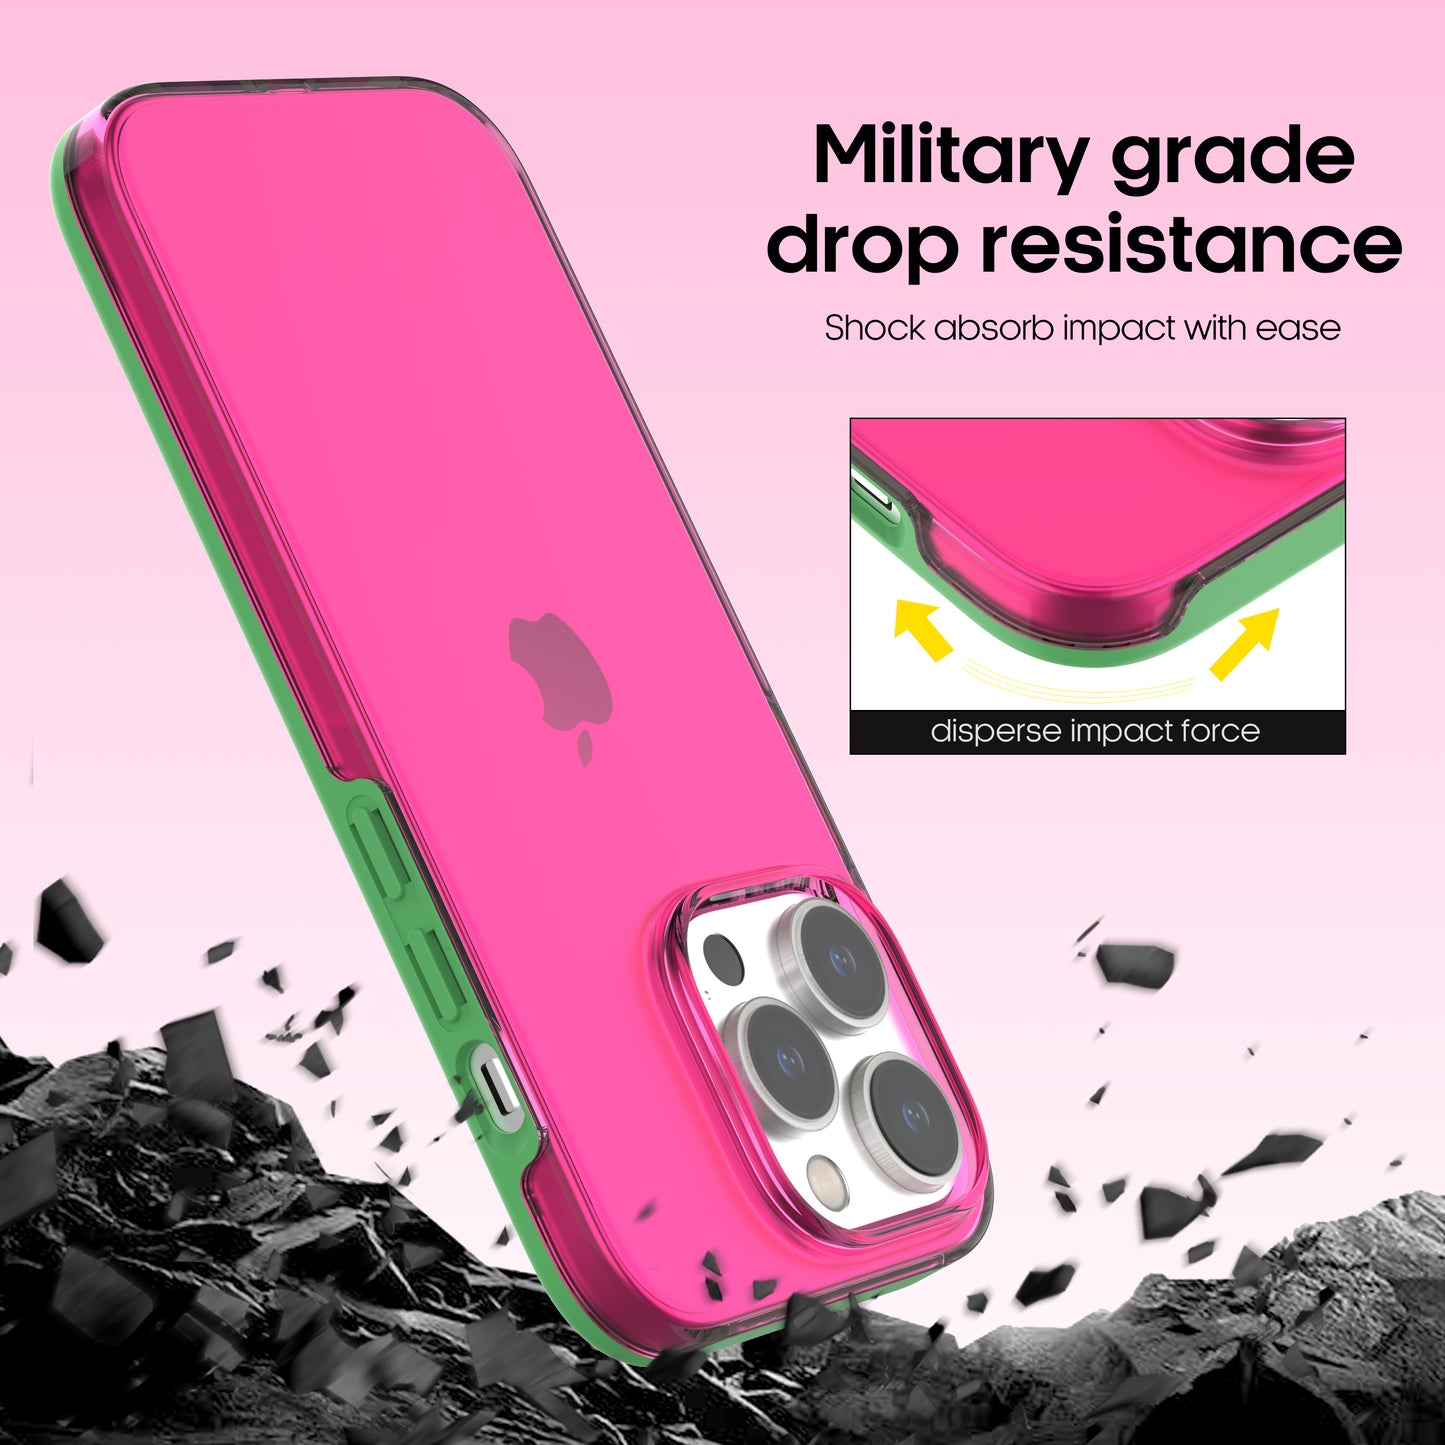 Fully degradable Color permeable biodegradable iphone 14 case